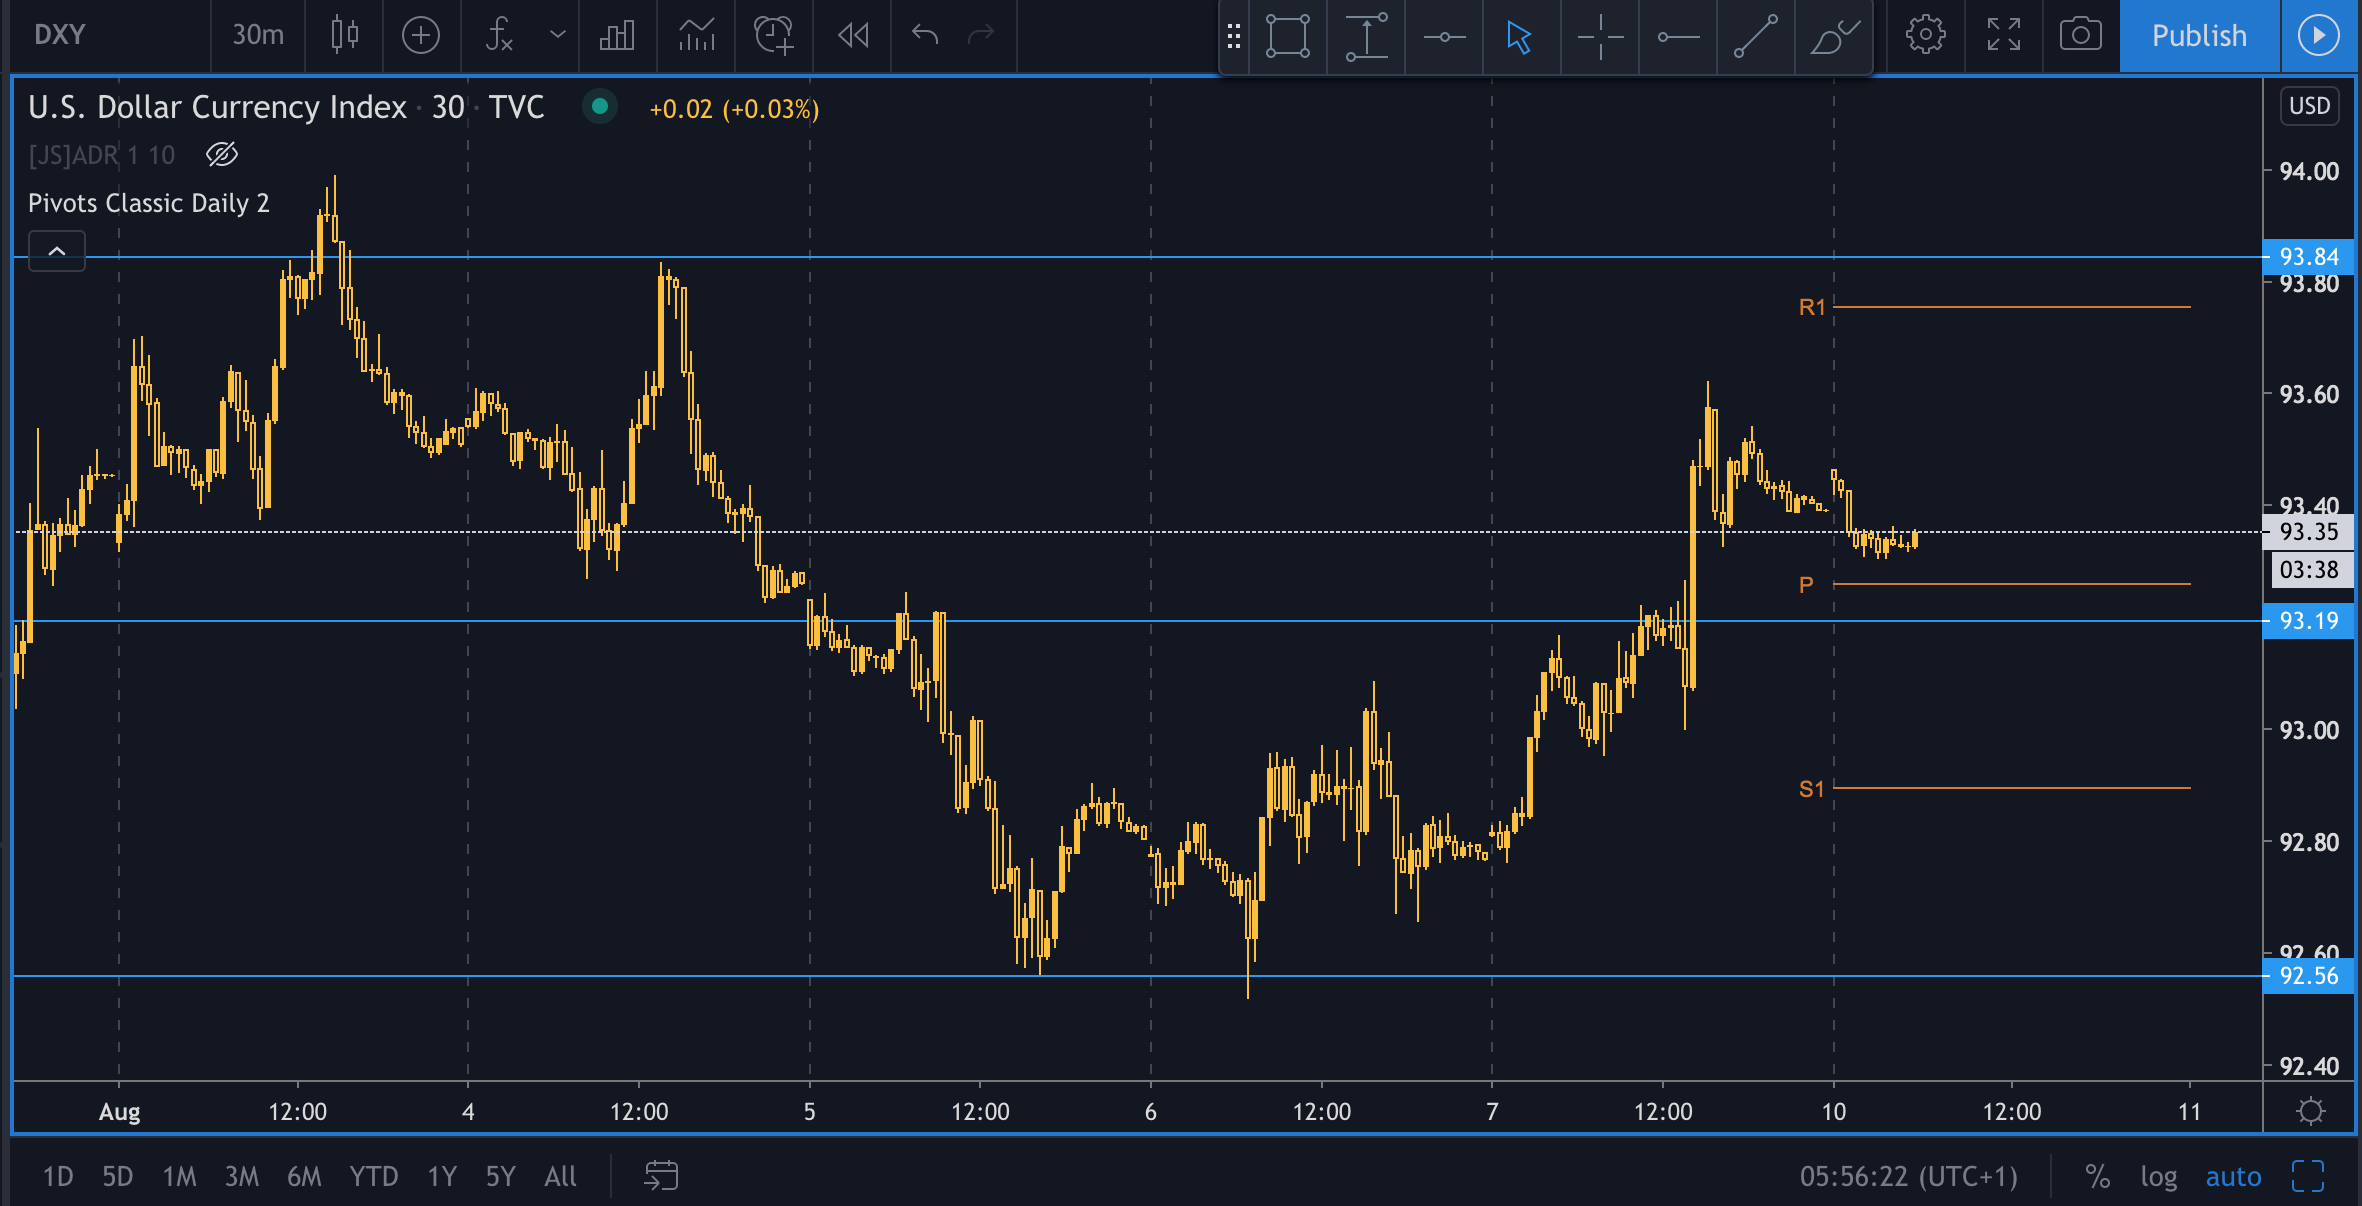 DXY in a tight range